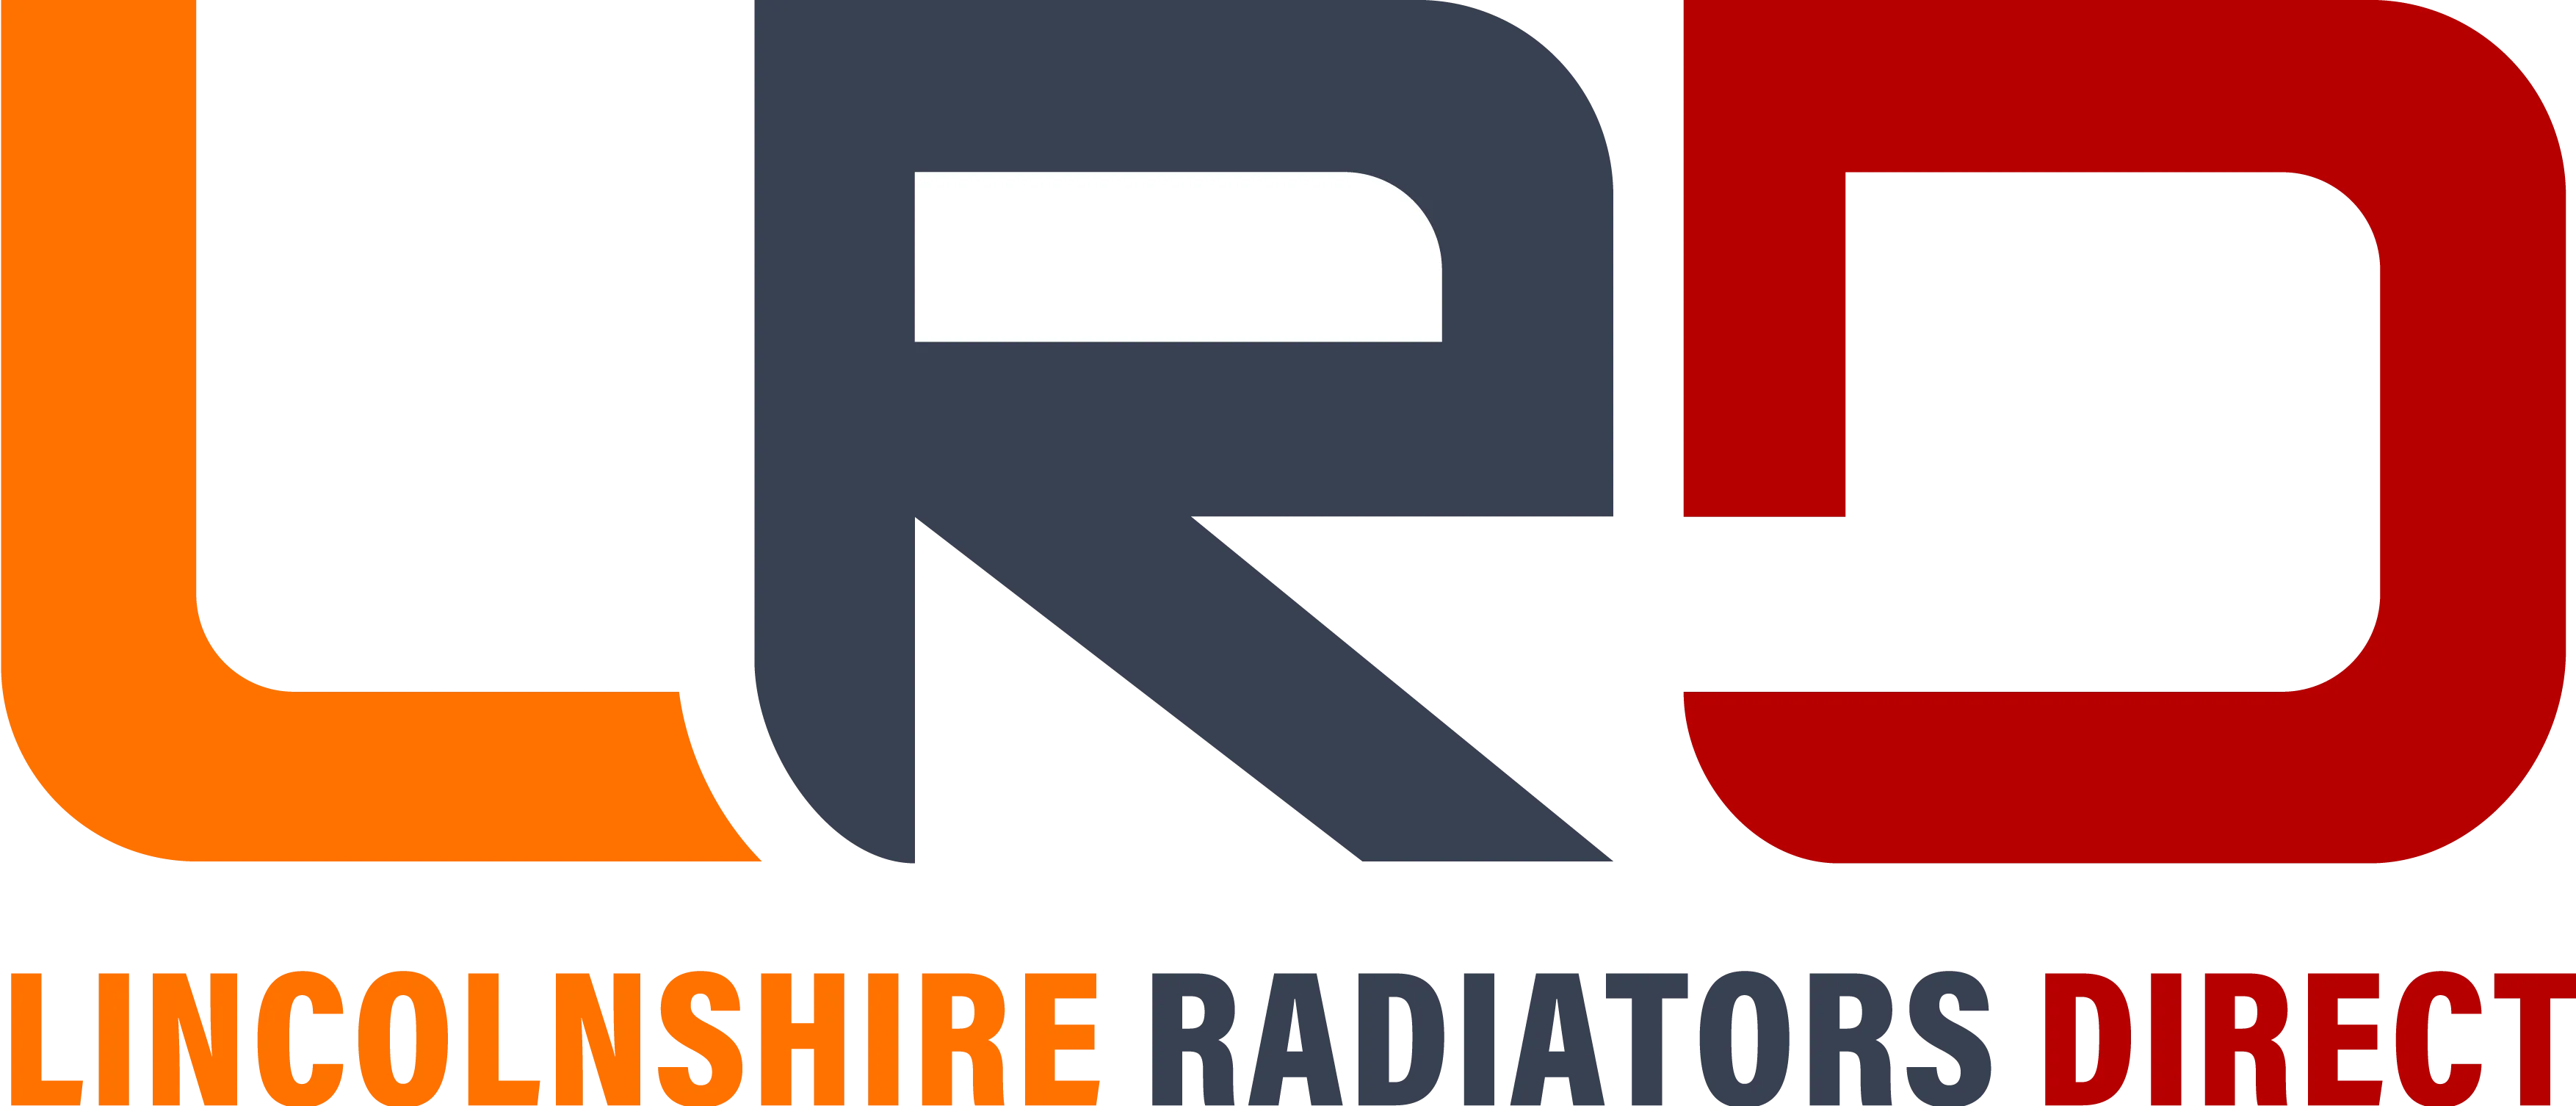 Lincolnshire Radiators Direct Free Shipping Code & Discount Coupons